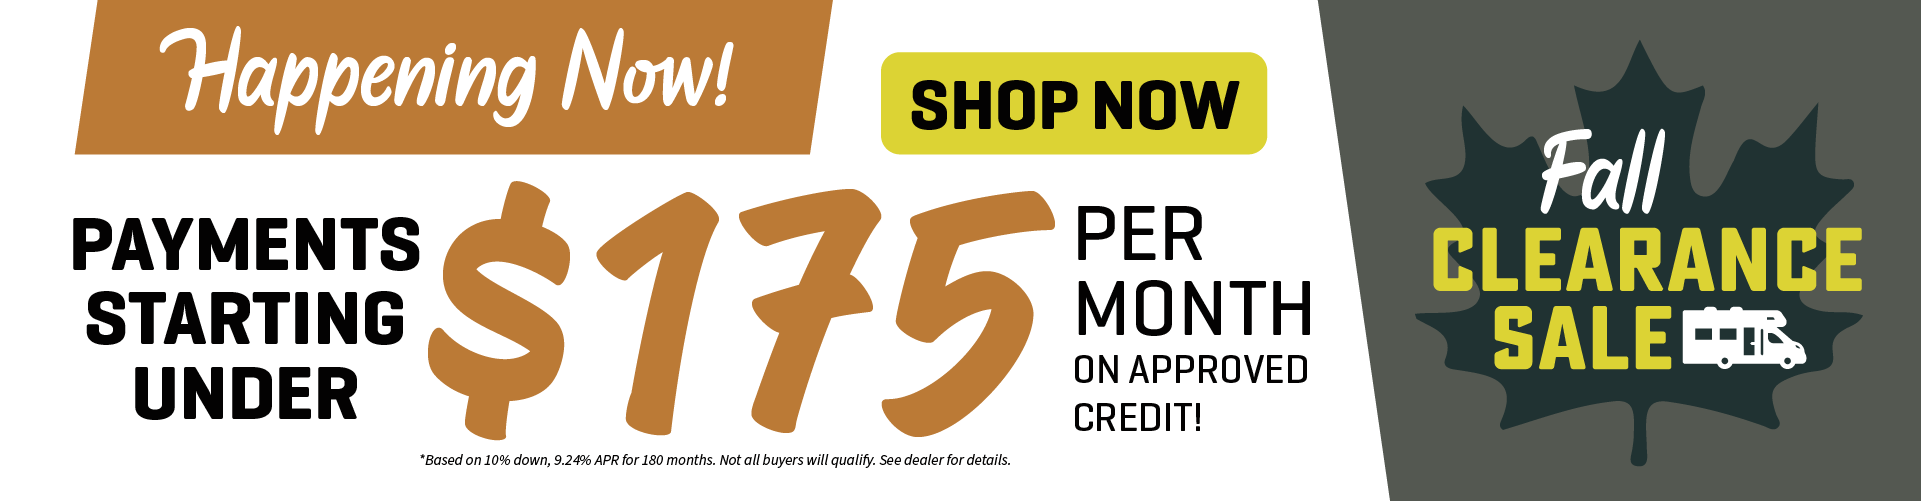 Fall Clearance Sale - Happening Now - Payments starting under $175 per month OAC